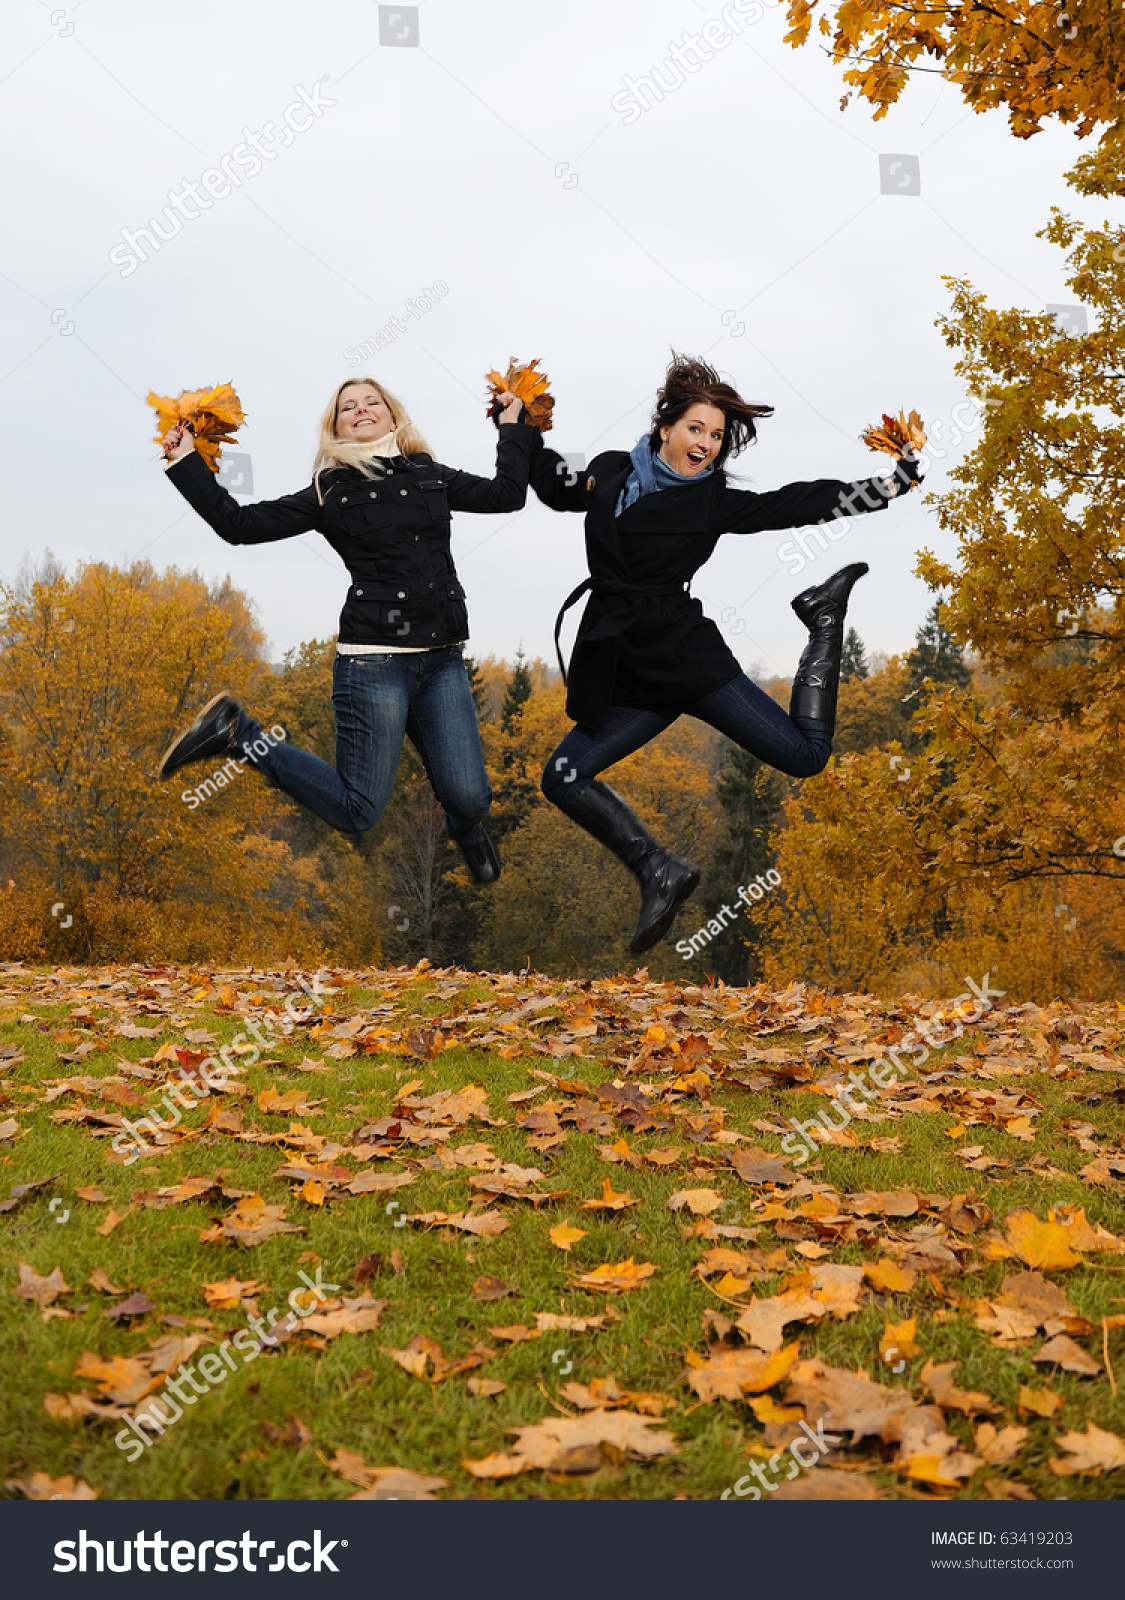 two beautiful girl friends with autumn leafs in a park jumping #63419203